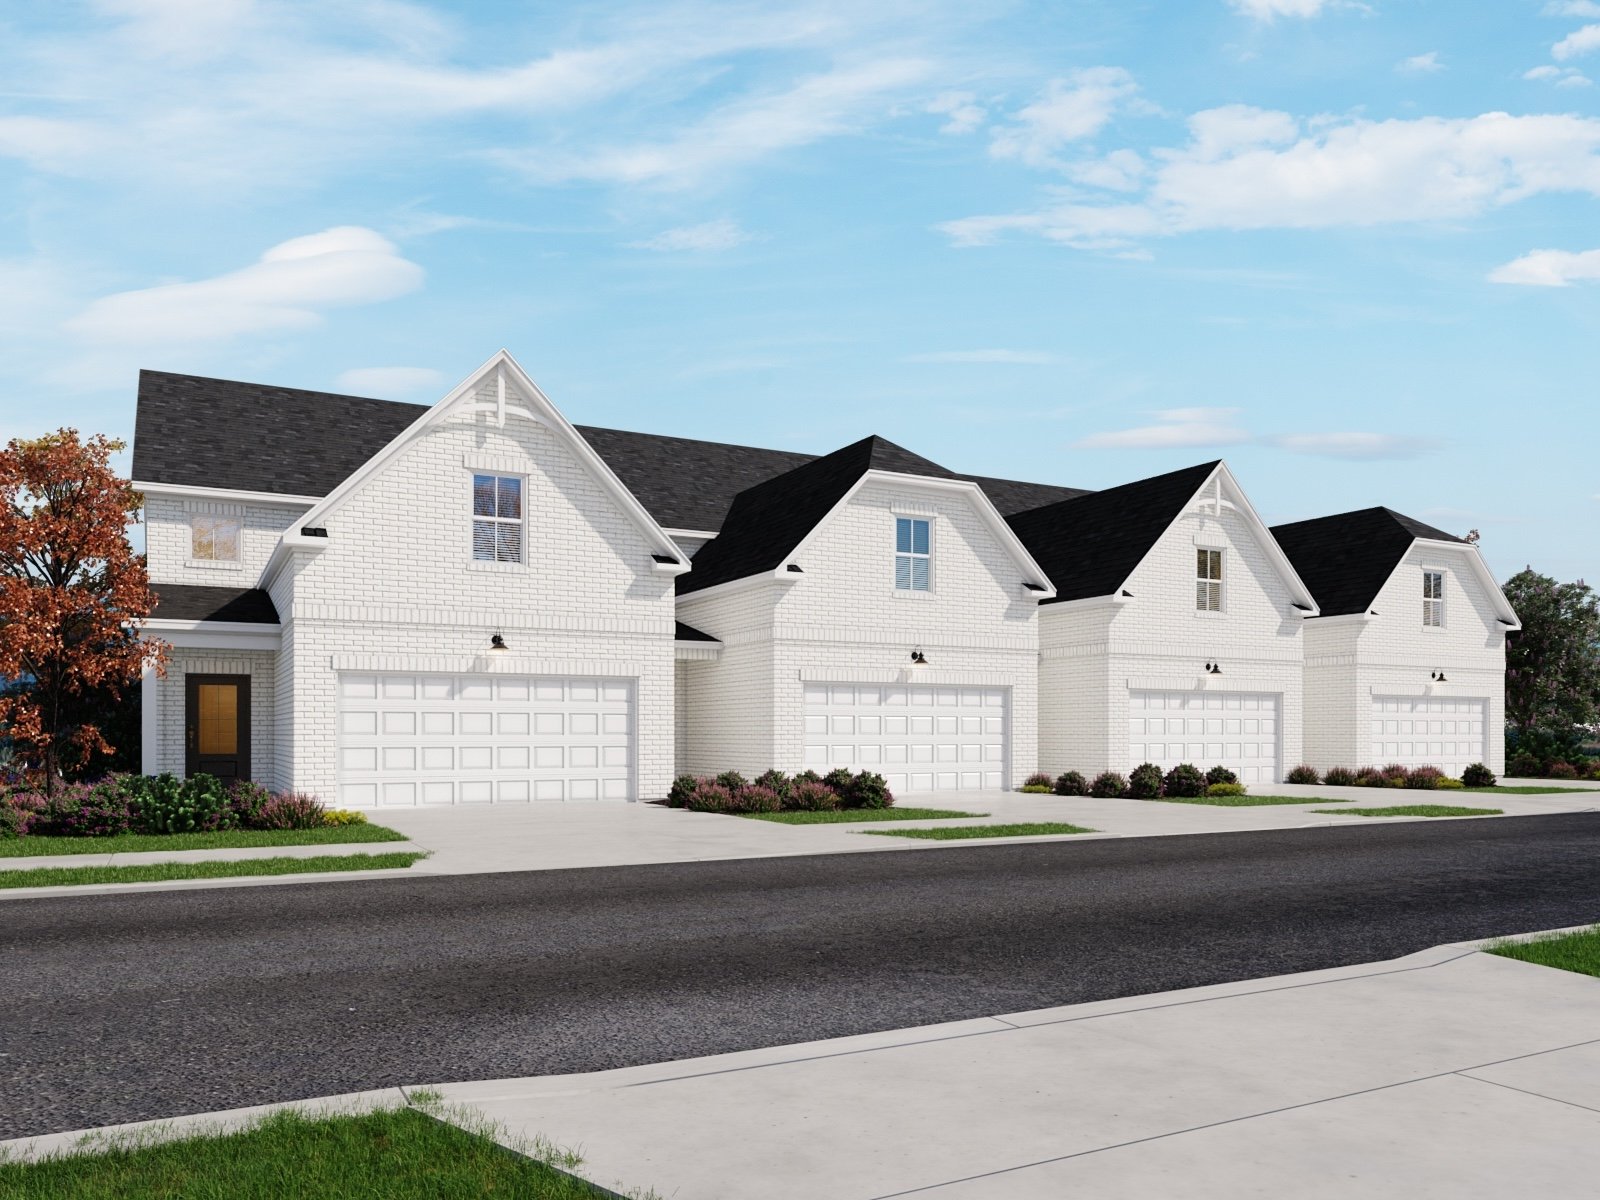 Helmsley Place 55+ Townhomes